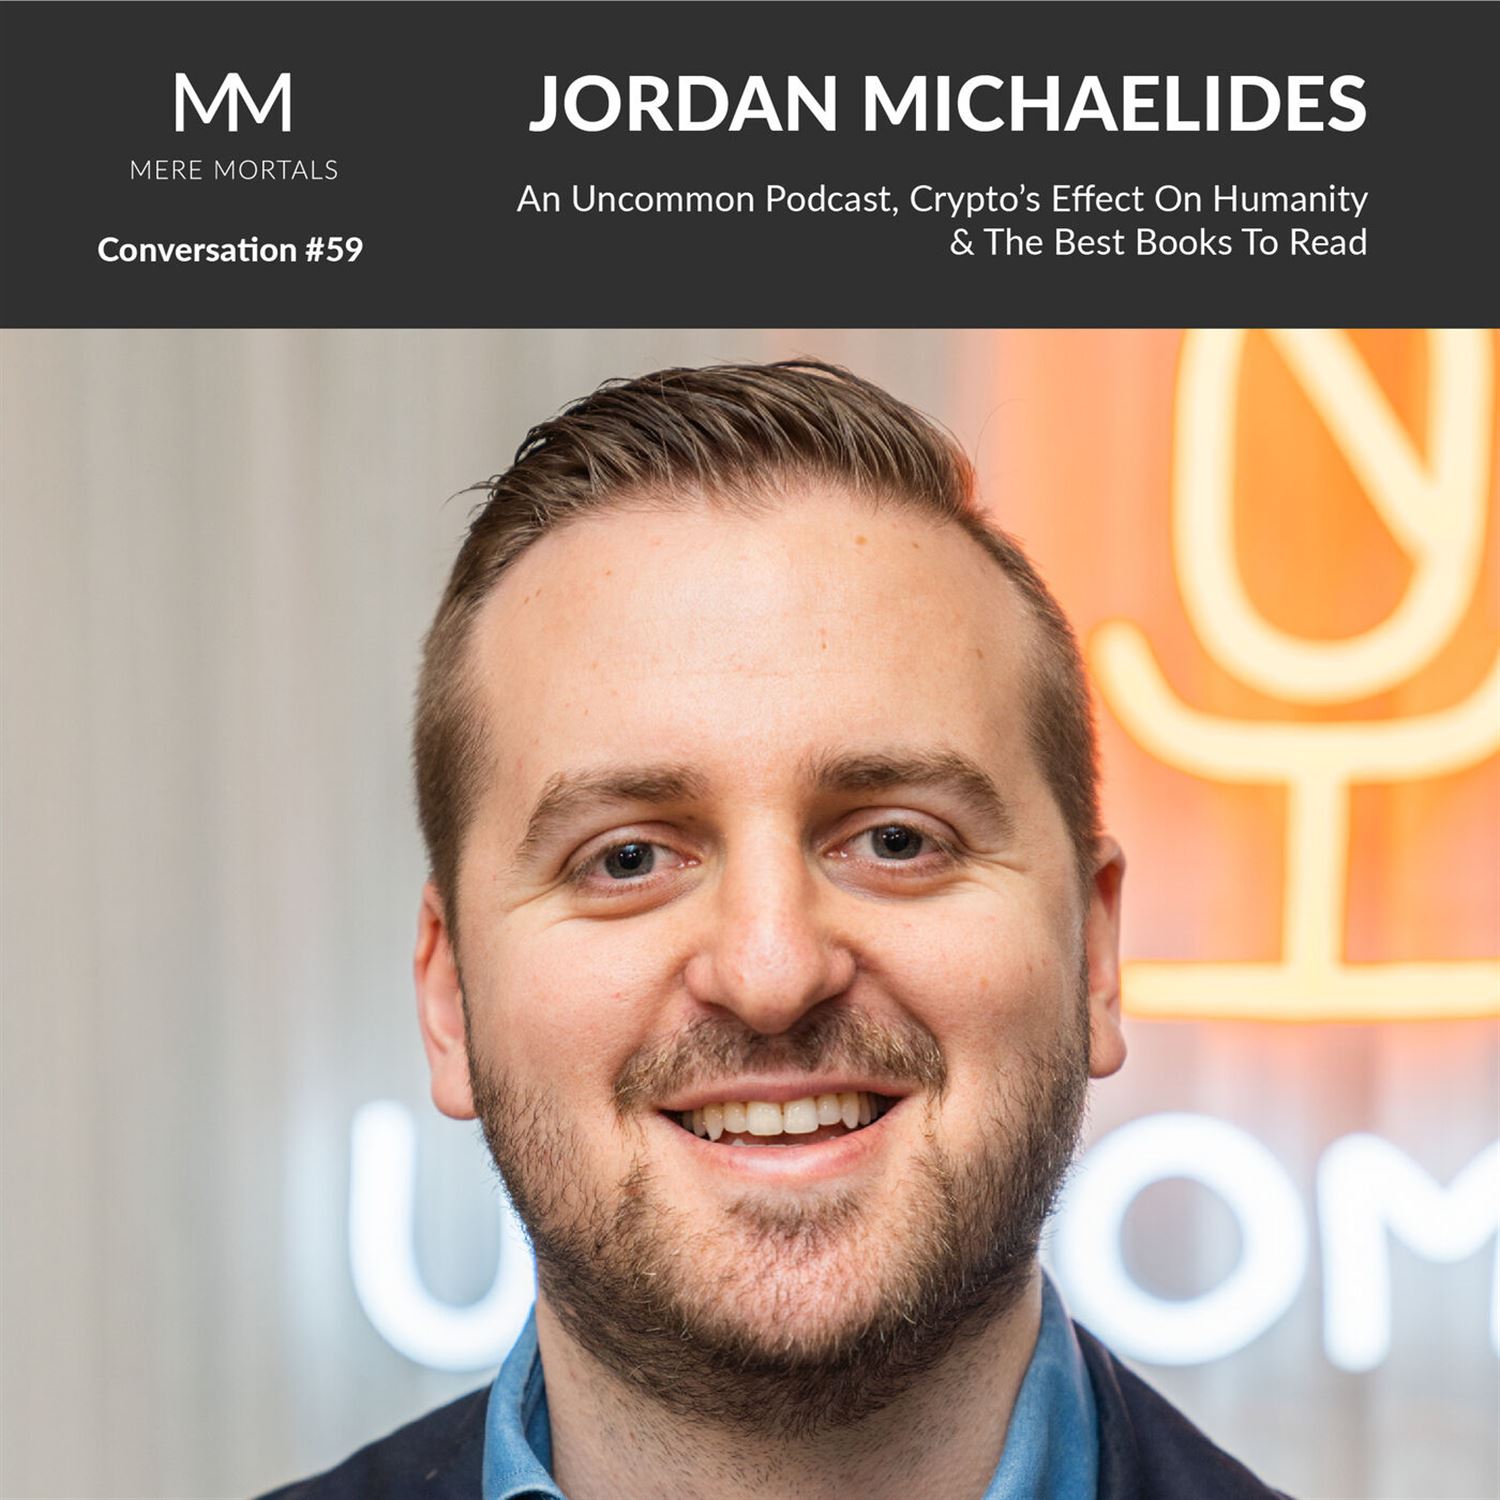 JORDAN MICHAELIDES | An Uncommon Podcast, Crypto’s Effect On Humanity & The Best Books To Read